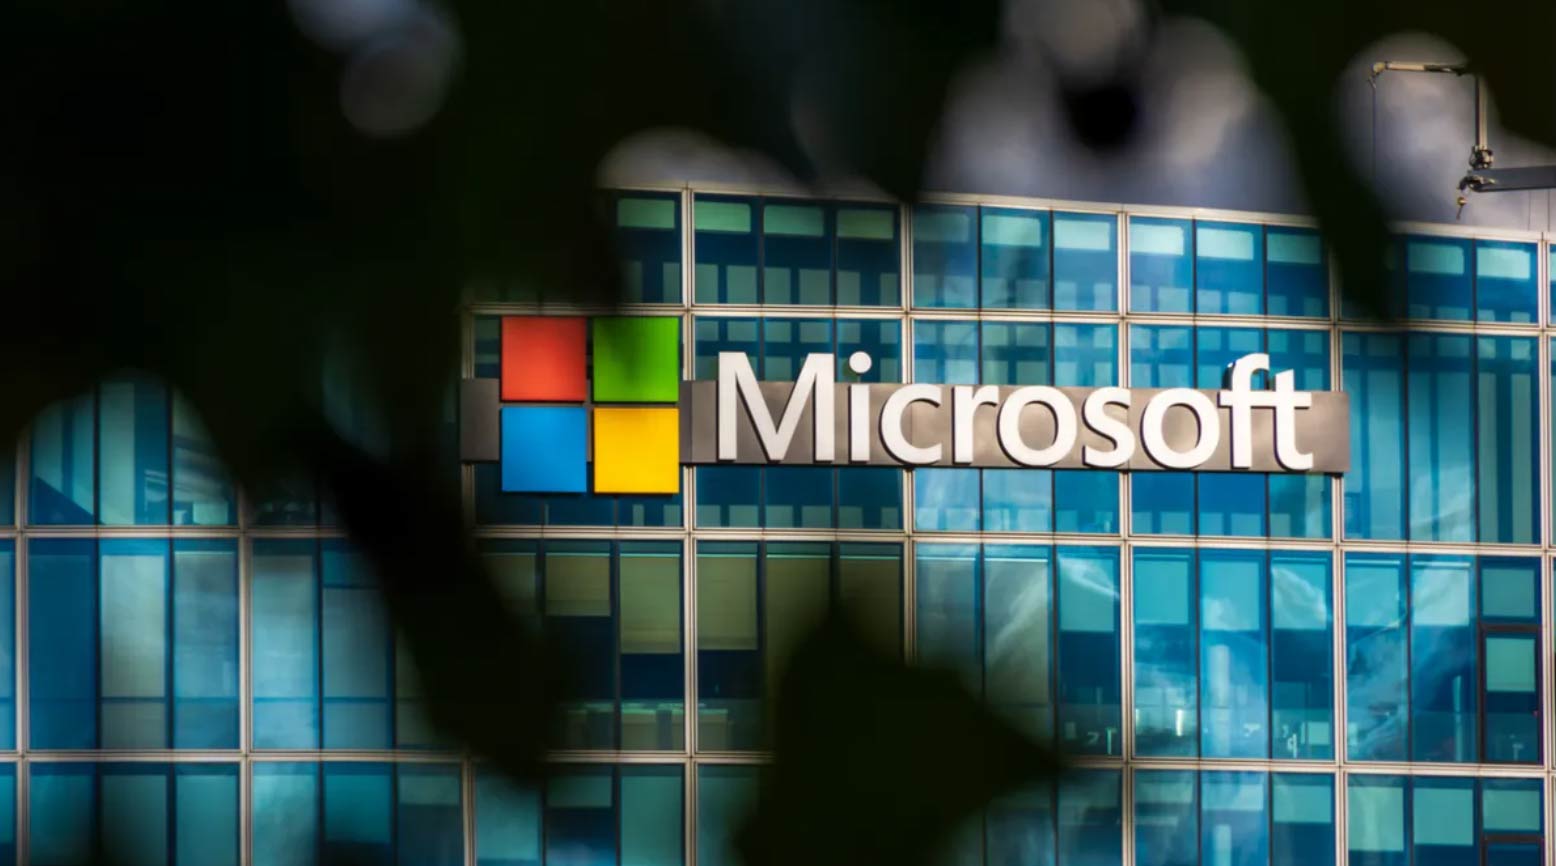 Microsoft AI to hit an all-time high of $2.6 trillion market valuation